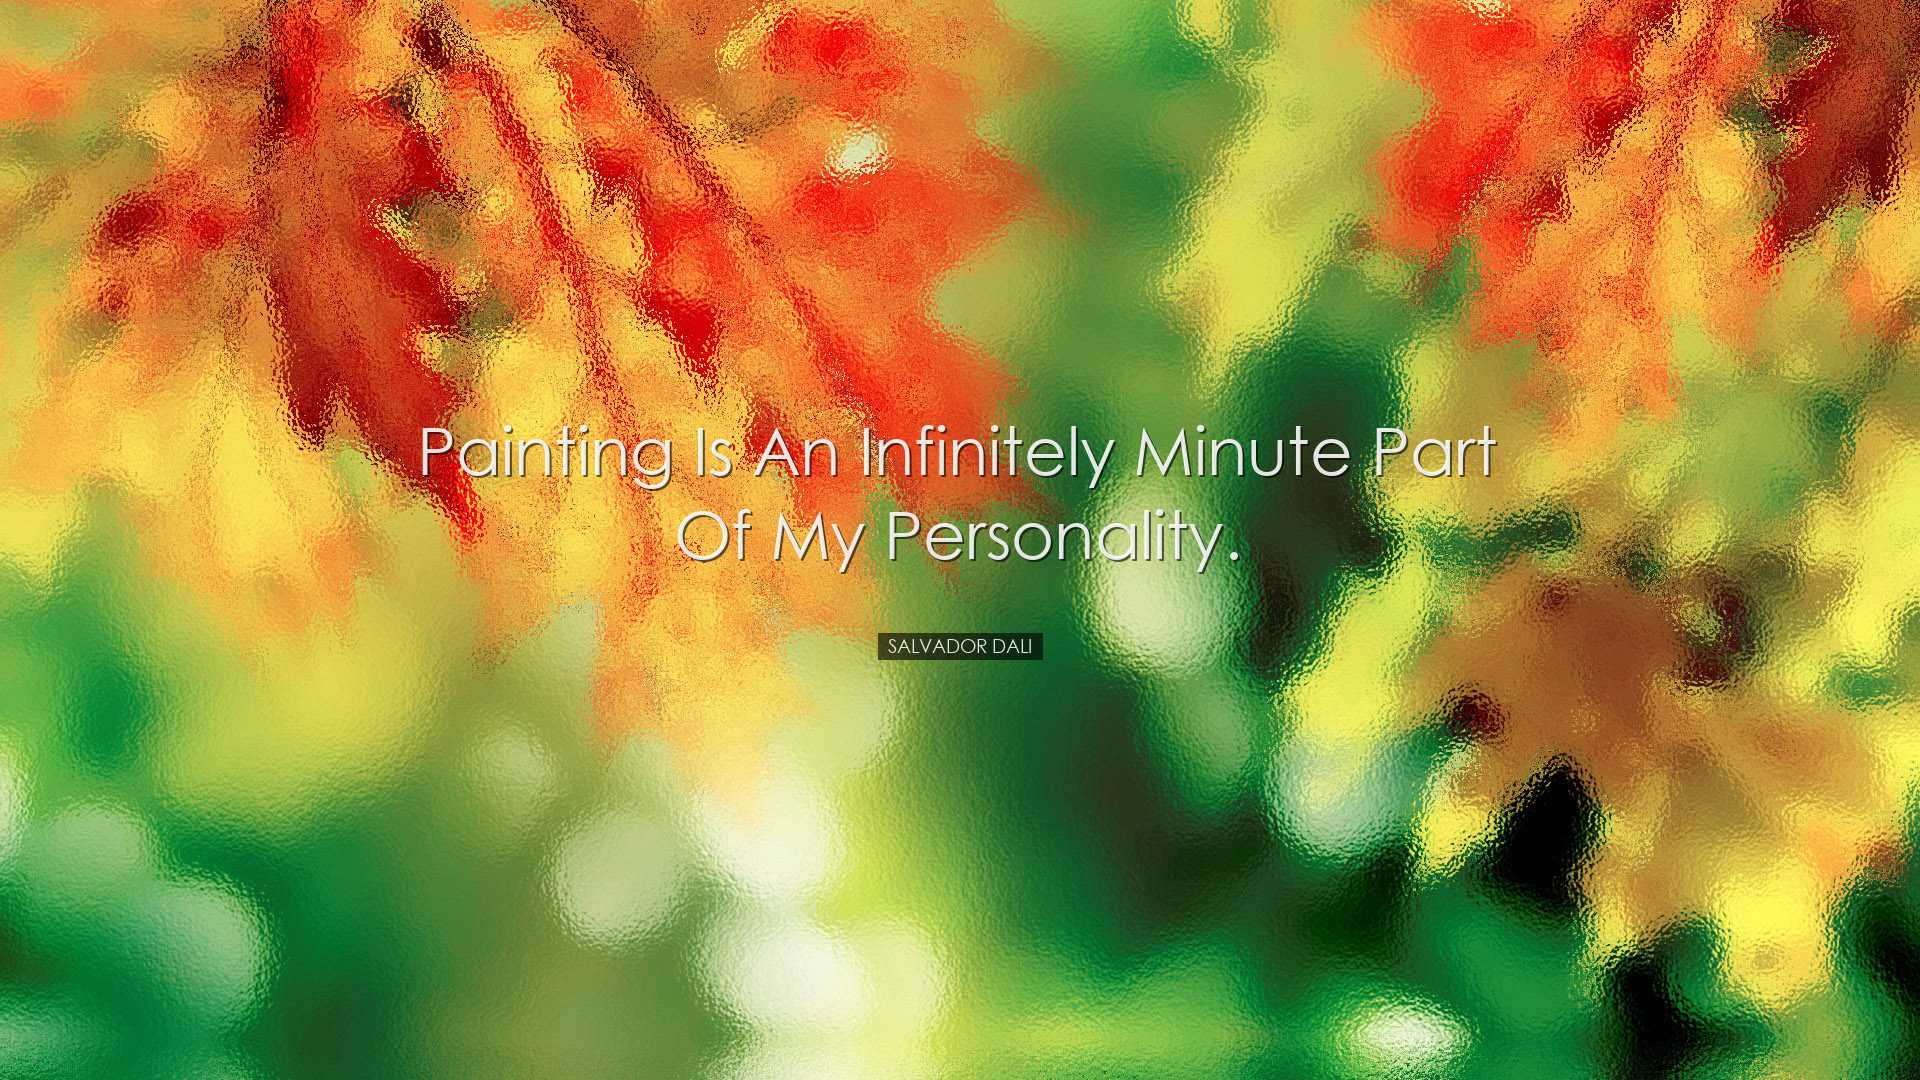 Painting is an infinitely minute part of my personality. - Salvado